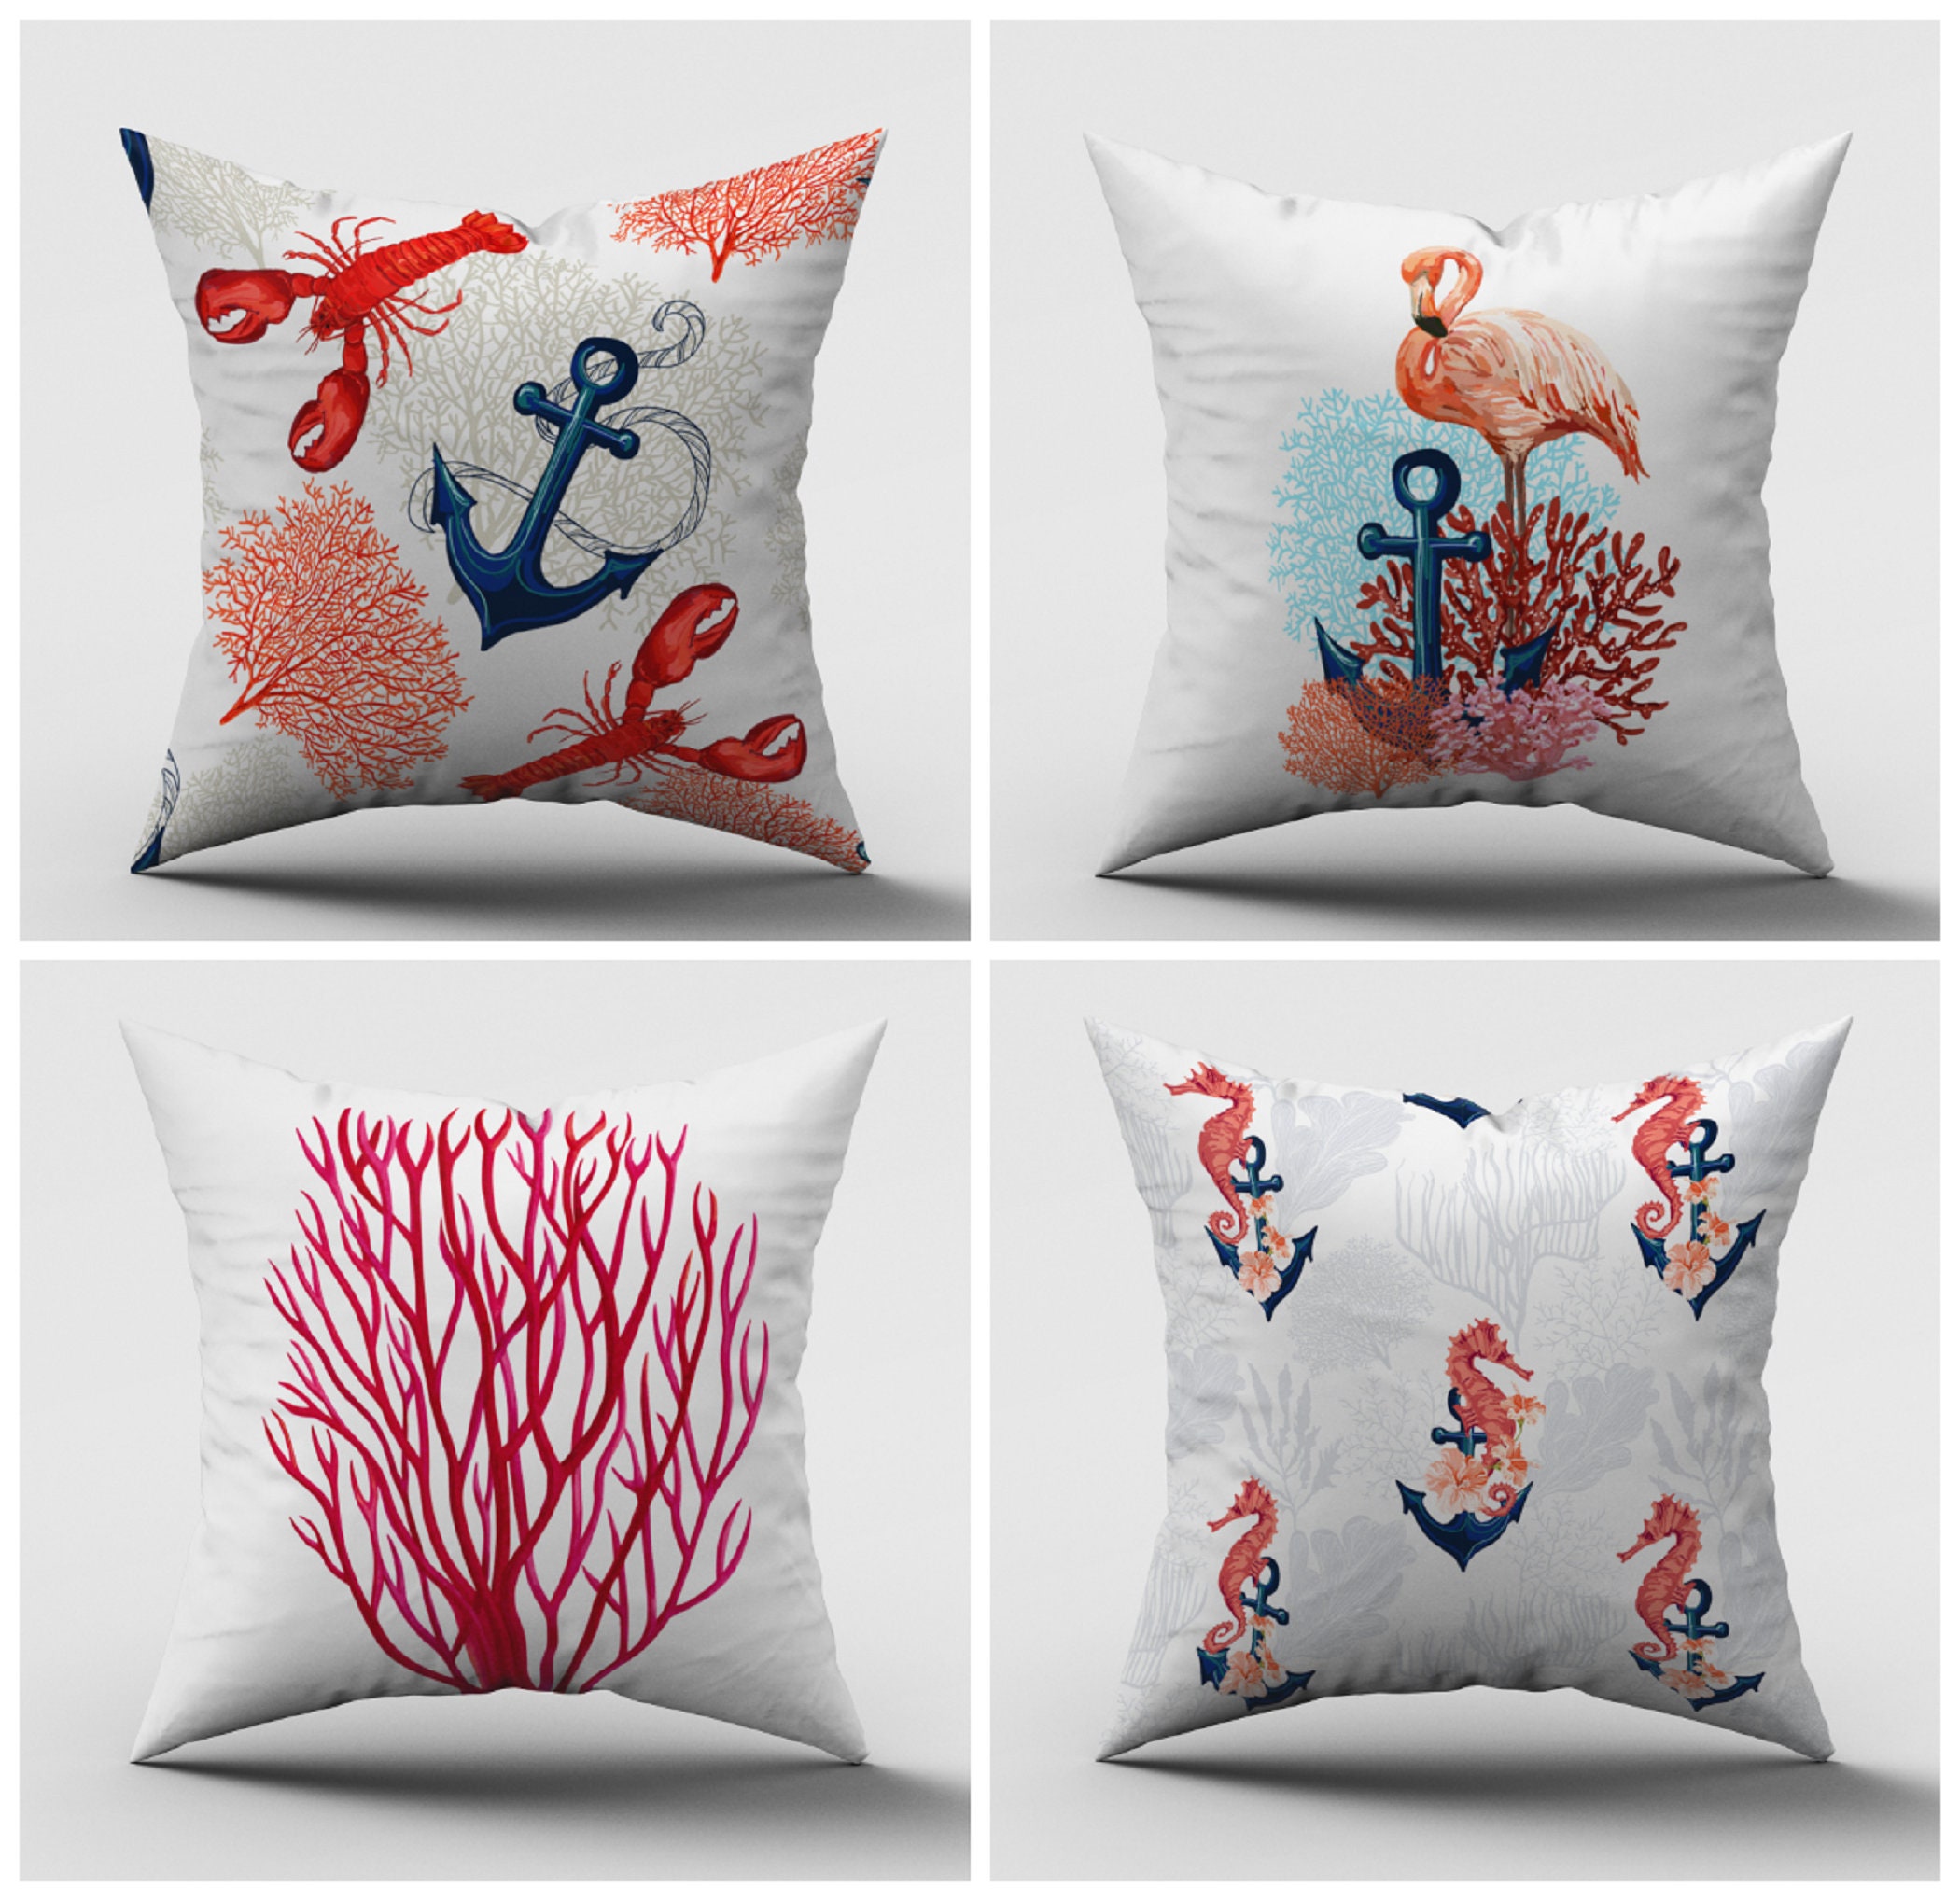 Catalina Aqua Coral Embroidered Throw Pillow, 18x18 – HiEnd Accents